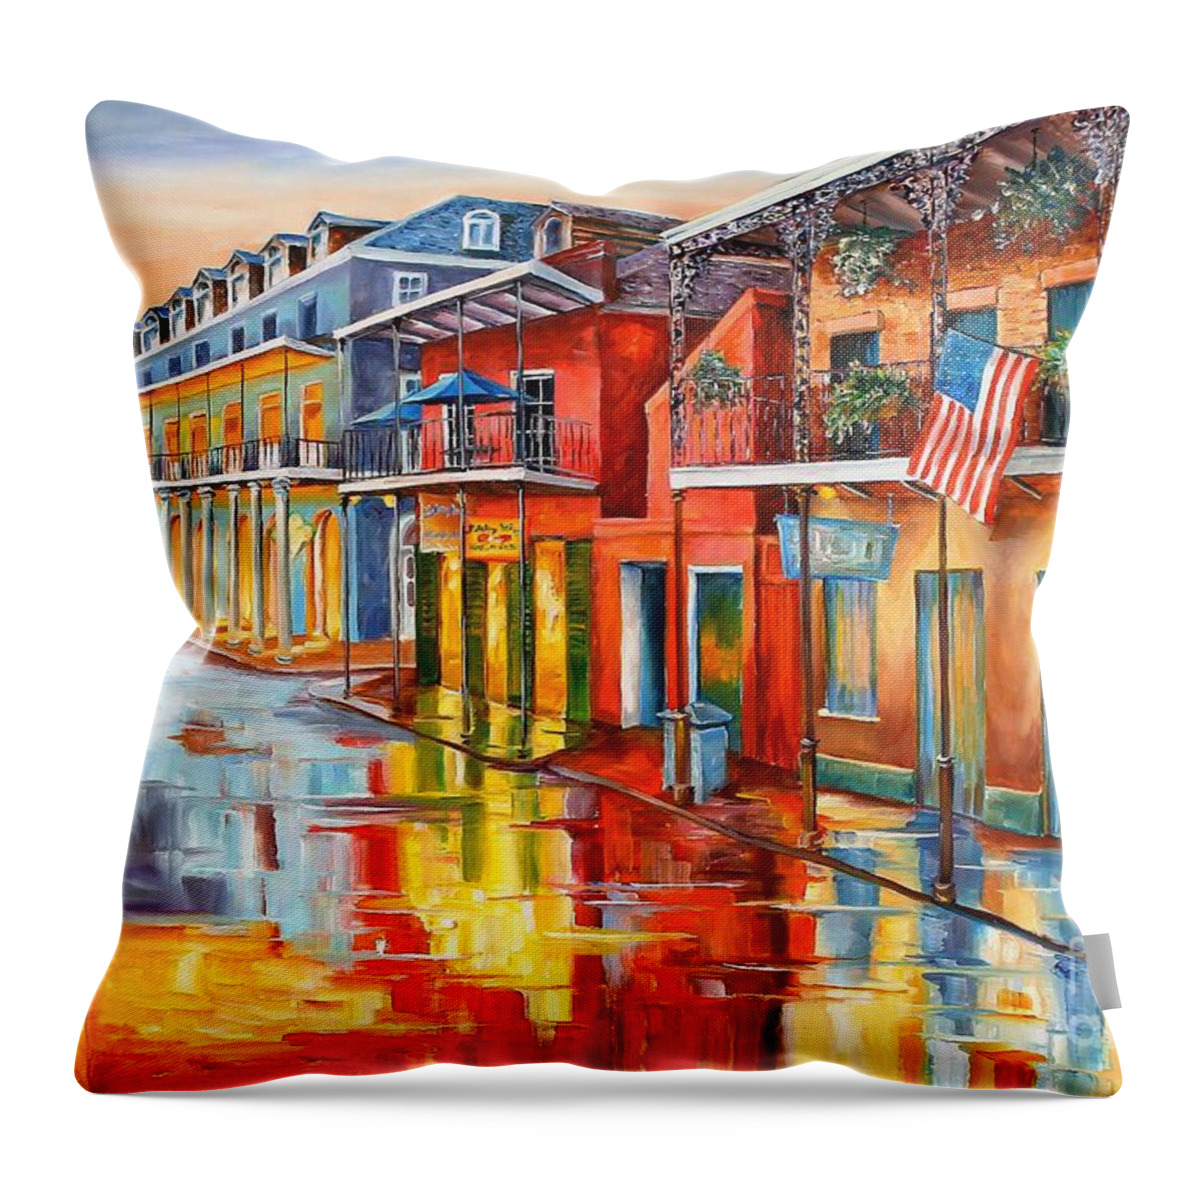 New Orleans Throw Pillow featuring the painting Bourbon Street Morning by Diane Millsap